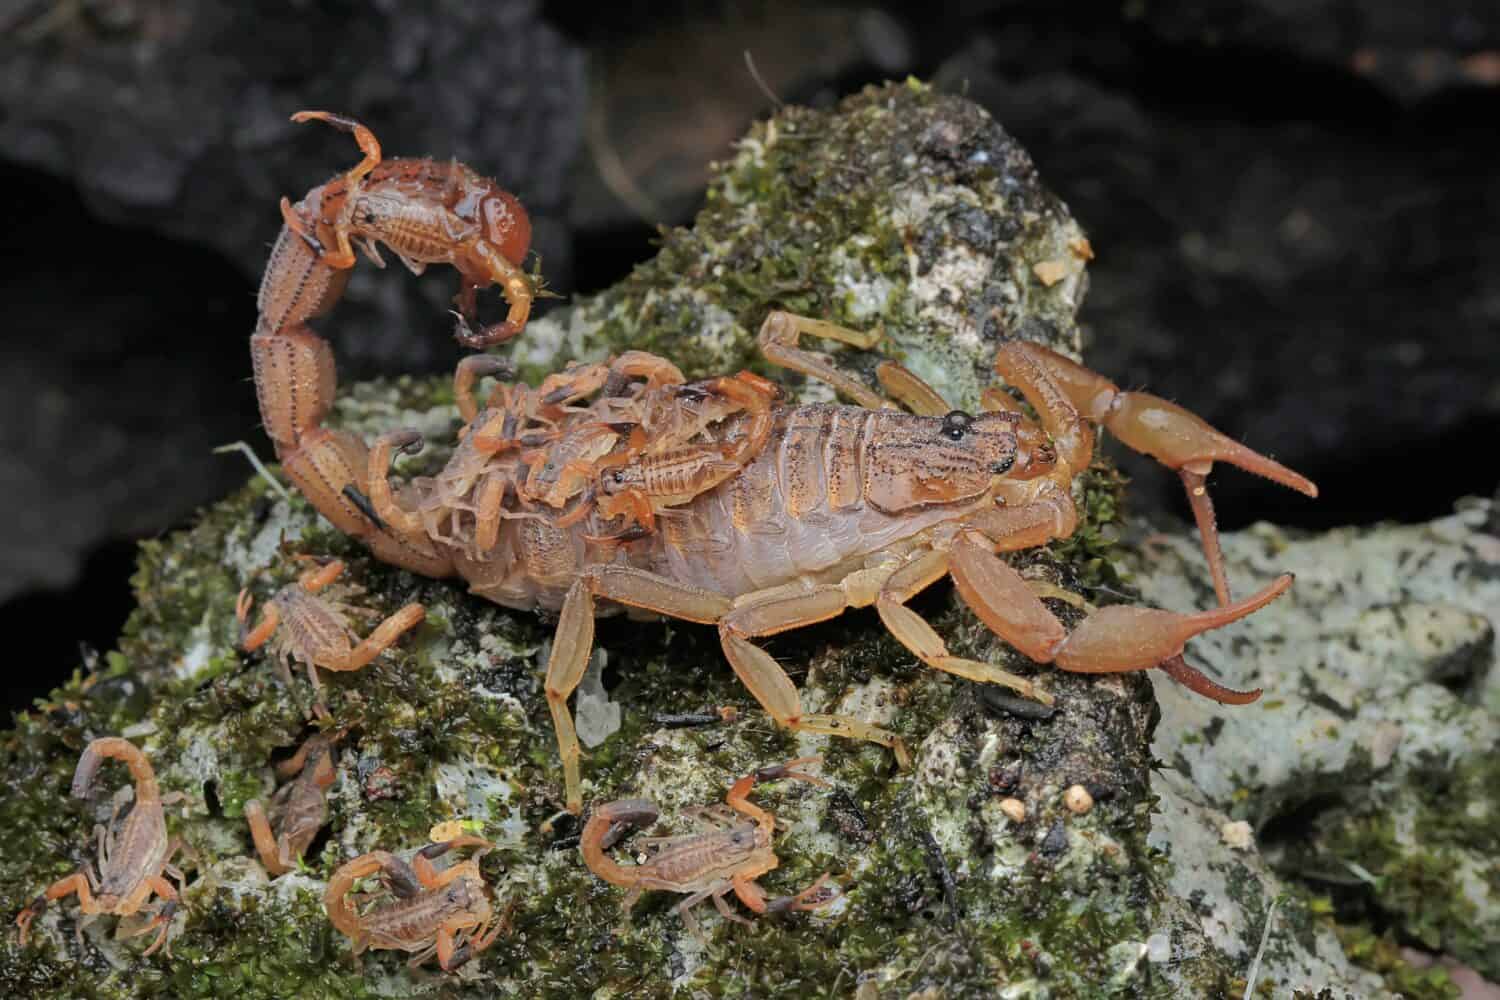 A scorpion mother is holding her babies to protect them from predator attacks. This venomous animal has the scientific name Hottentotta hottentotta.